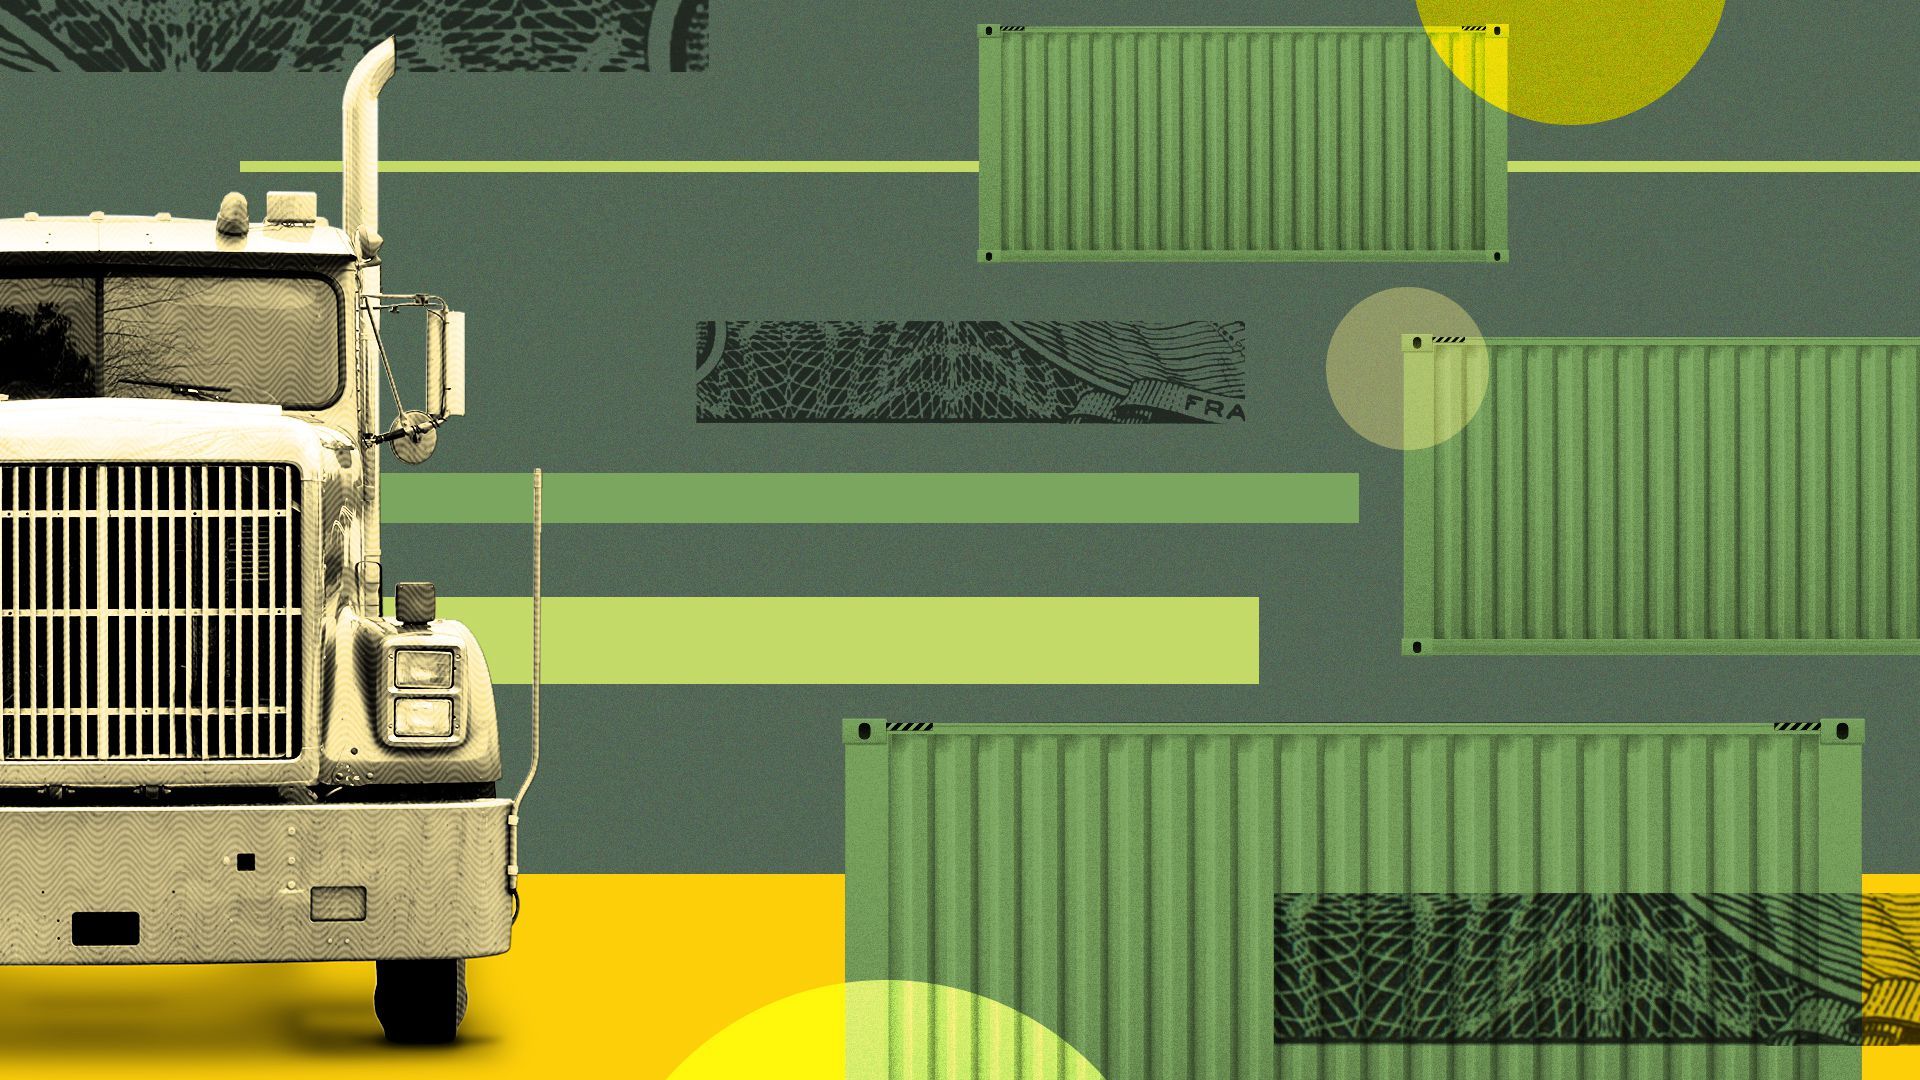 Illustration of a semitruck and shipping containers surrounded by abstract shapes and money elements.